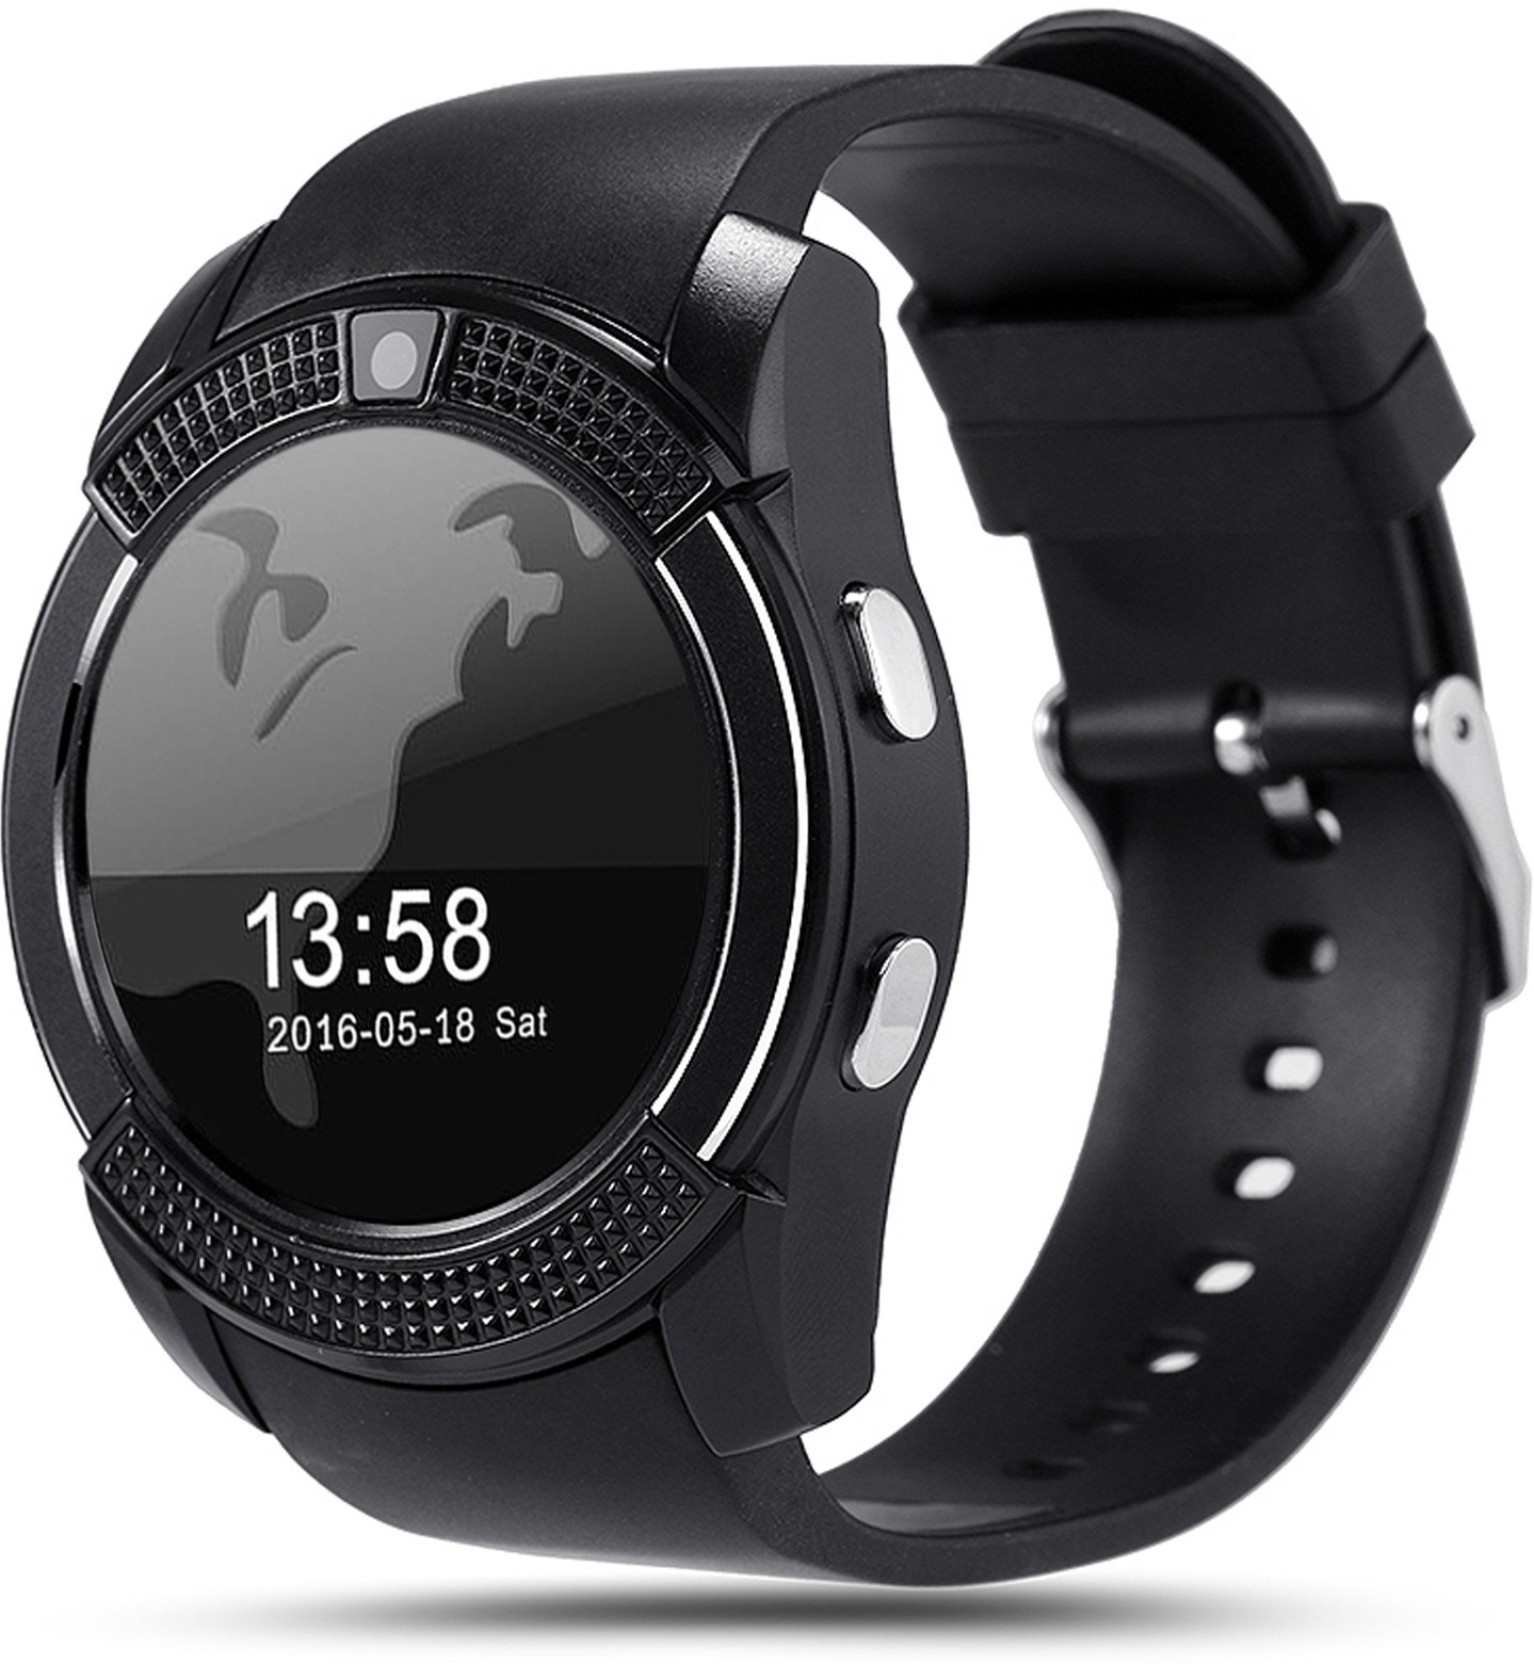 Noise Turbo Black Smartwatch Price in India - Buy Noise ...